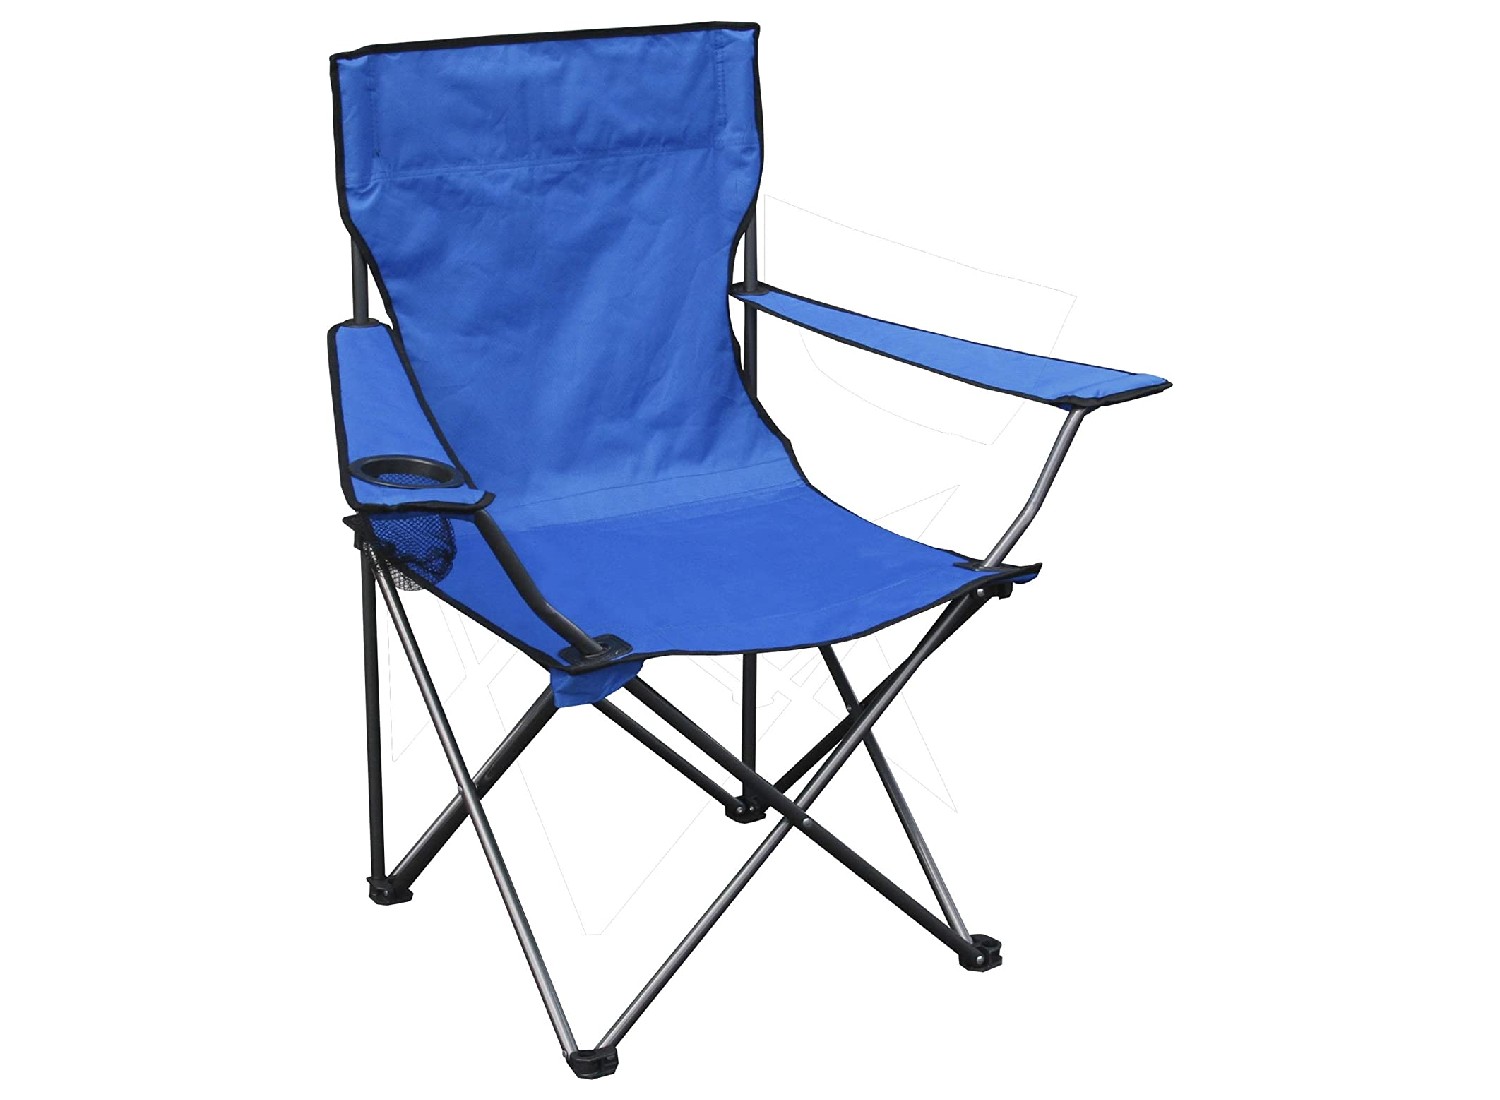 Outside Fold Up Chairs Top Sellers, 53% OFF | edetaria.com